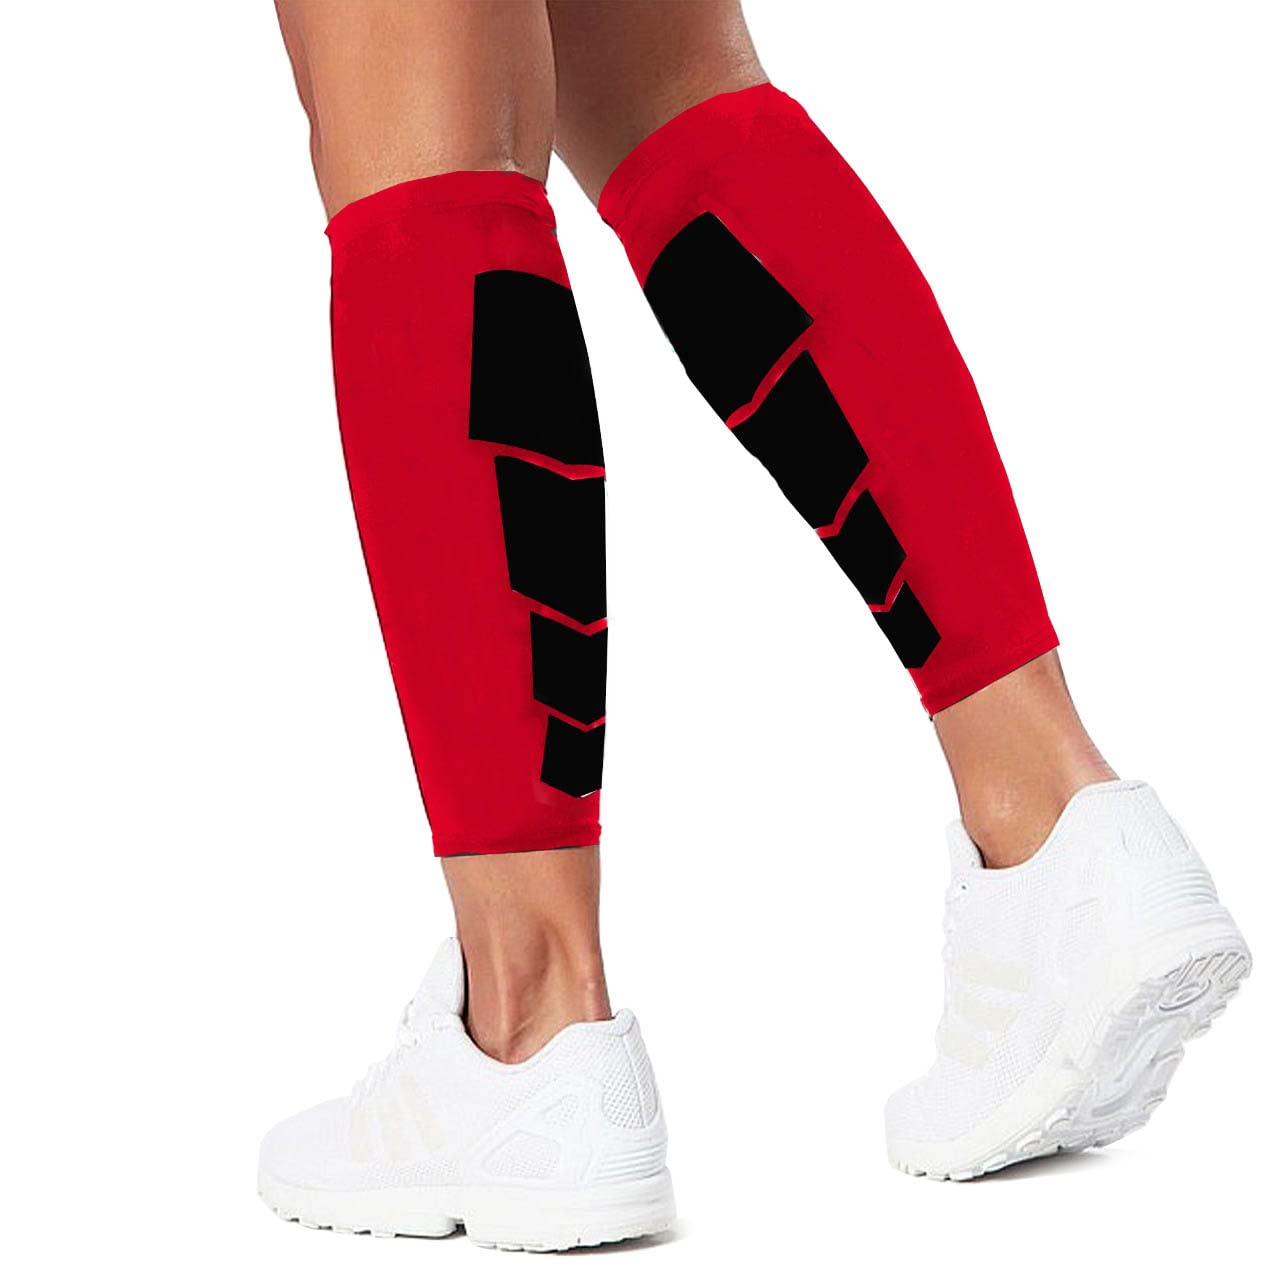 Gemx Calf Compression Sleeve Men & Women (1 Pair) Footless Calf Sleeves for Shin  Splints Support Breathable Neoprene Fabric Shin Sleeves for Calf Support  Ideal For Running Cycling & Hiking XL (Calf